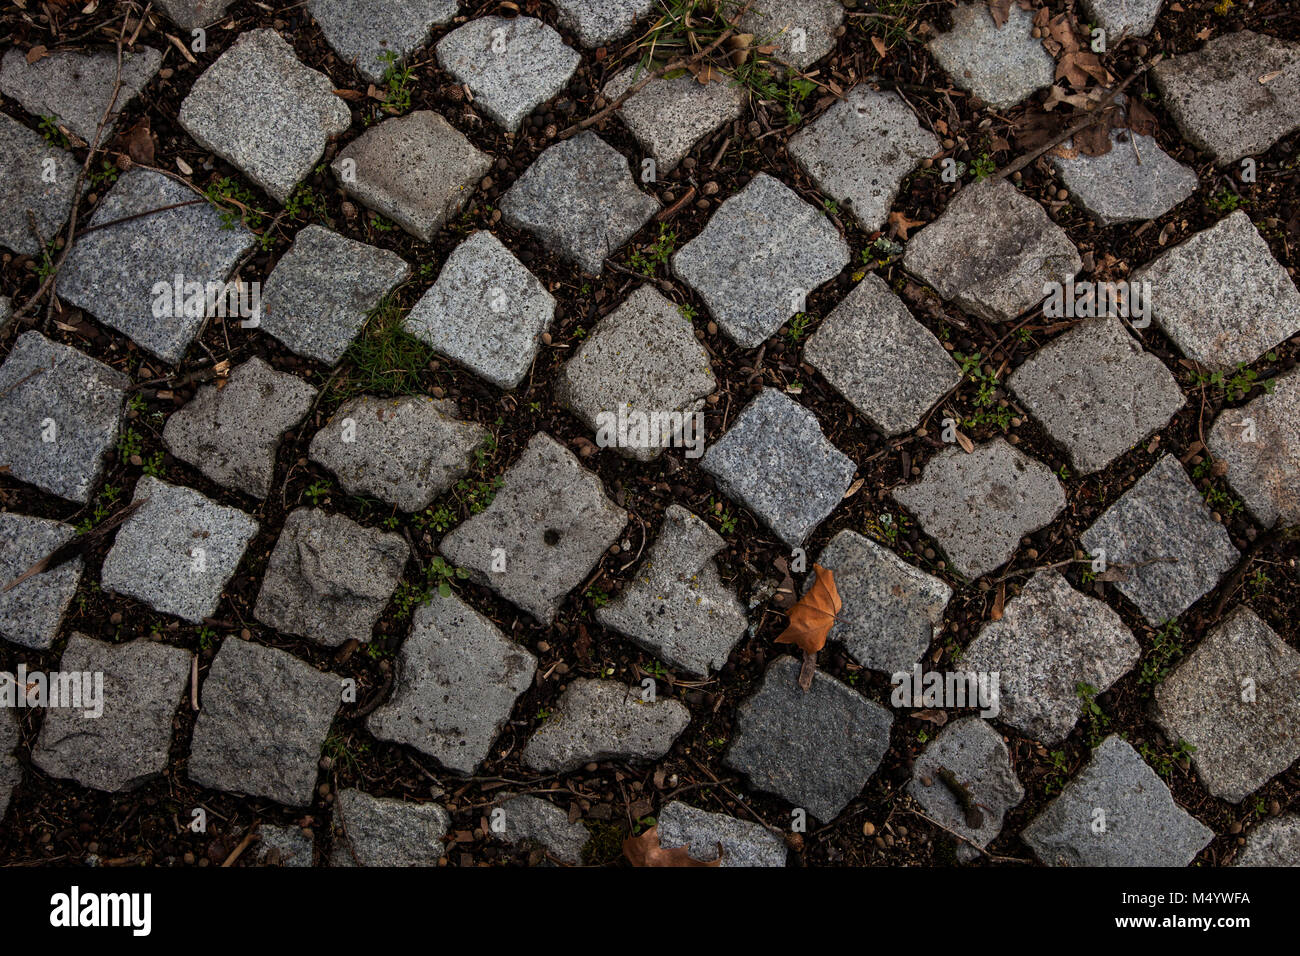 Stone pavement texture. Granite cobble stoned pavement background. Abstract background of old cobblestone pavement close-up. Seamless texture. Prague Stock Photo